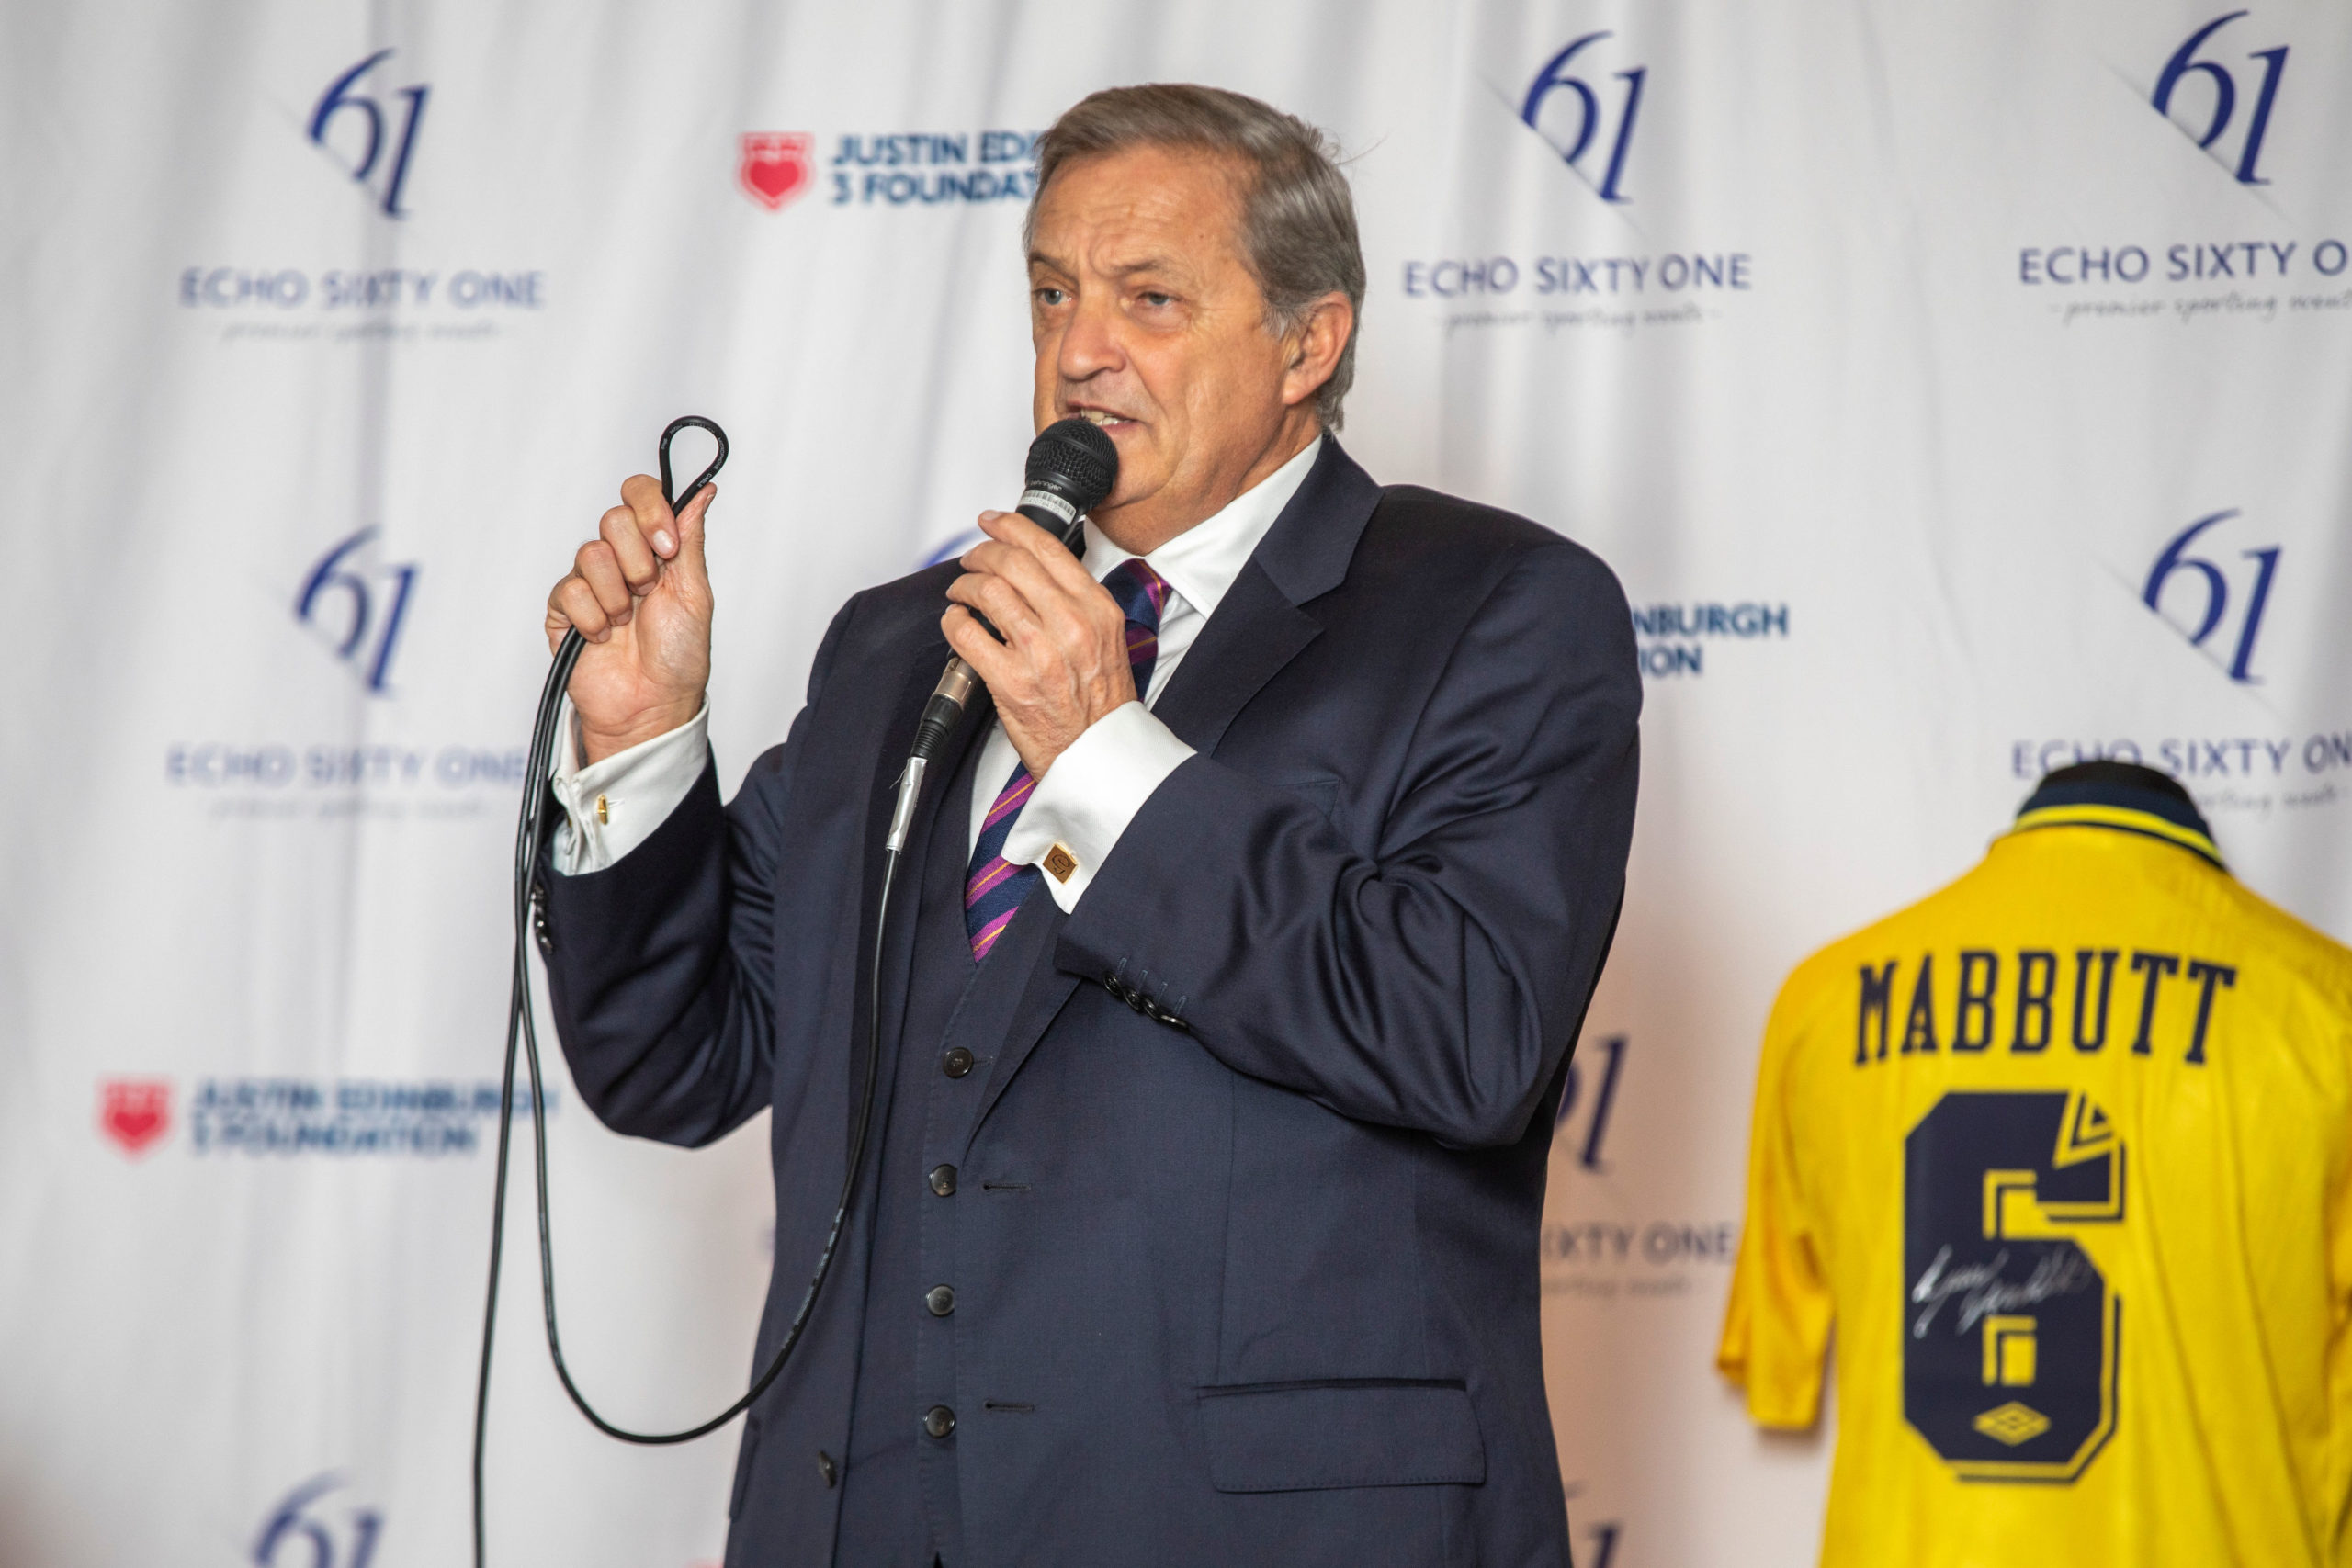 Echo Sixty One’s An Evening with Gary Mabbutt MBE raises £788 for JE3 Foundation